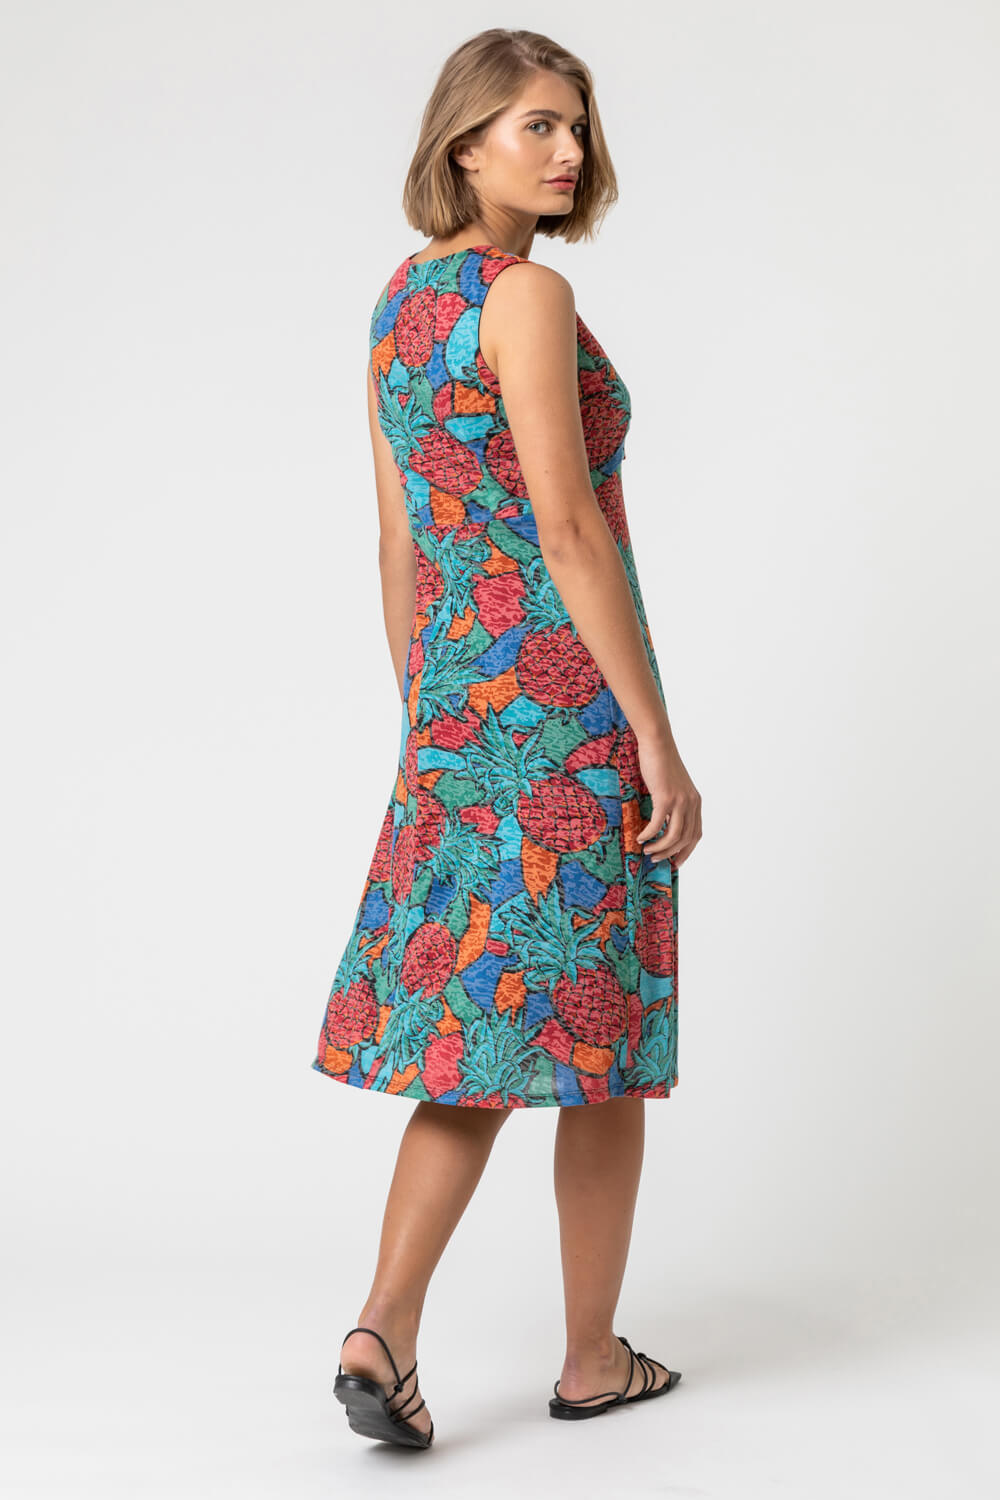 Burnout Pineapple Print Knotted Dress in Turquoise - Roman Originals UK